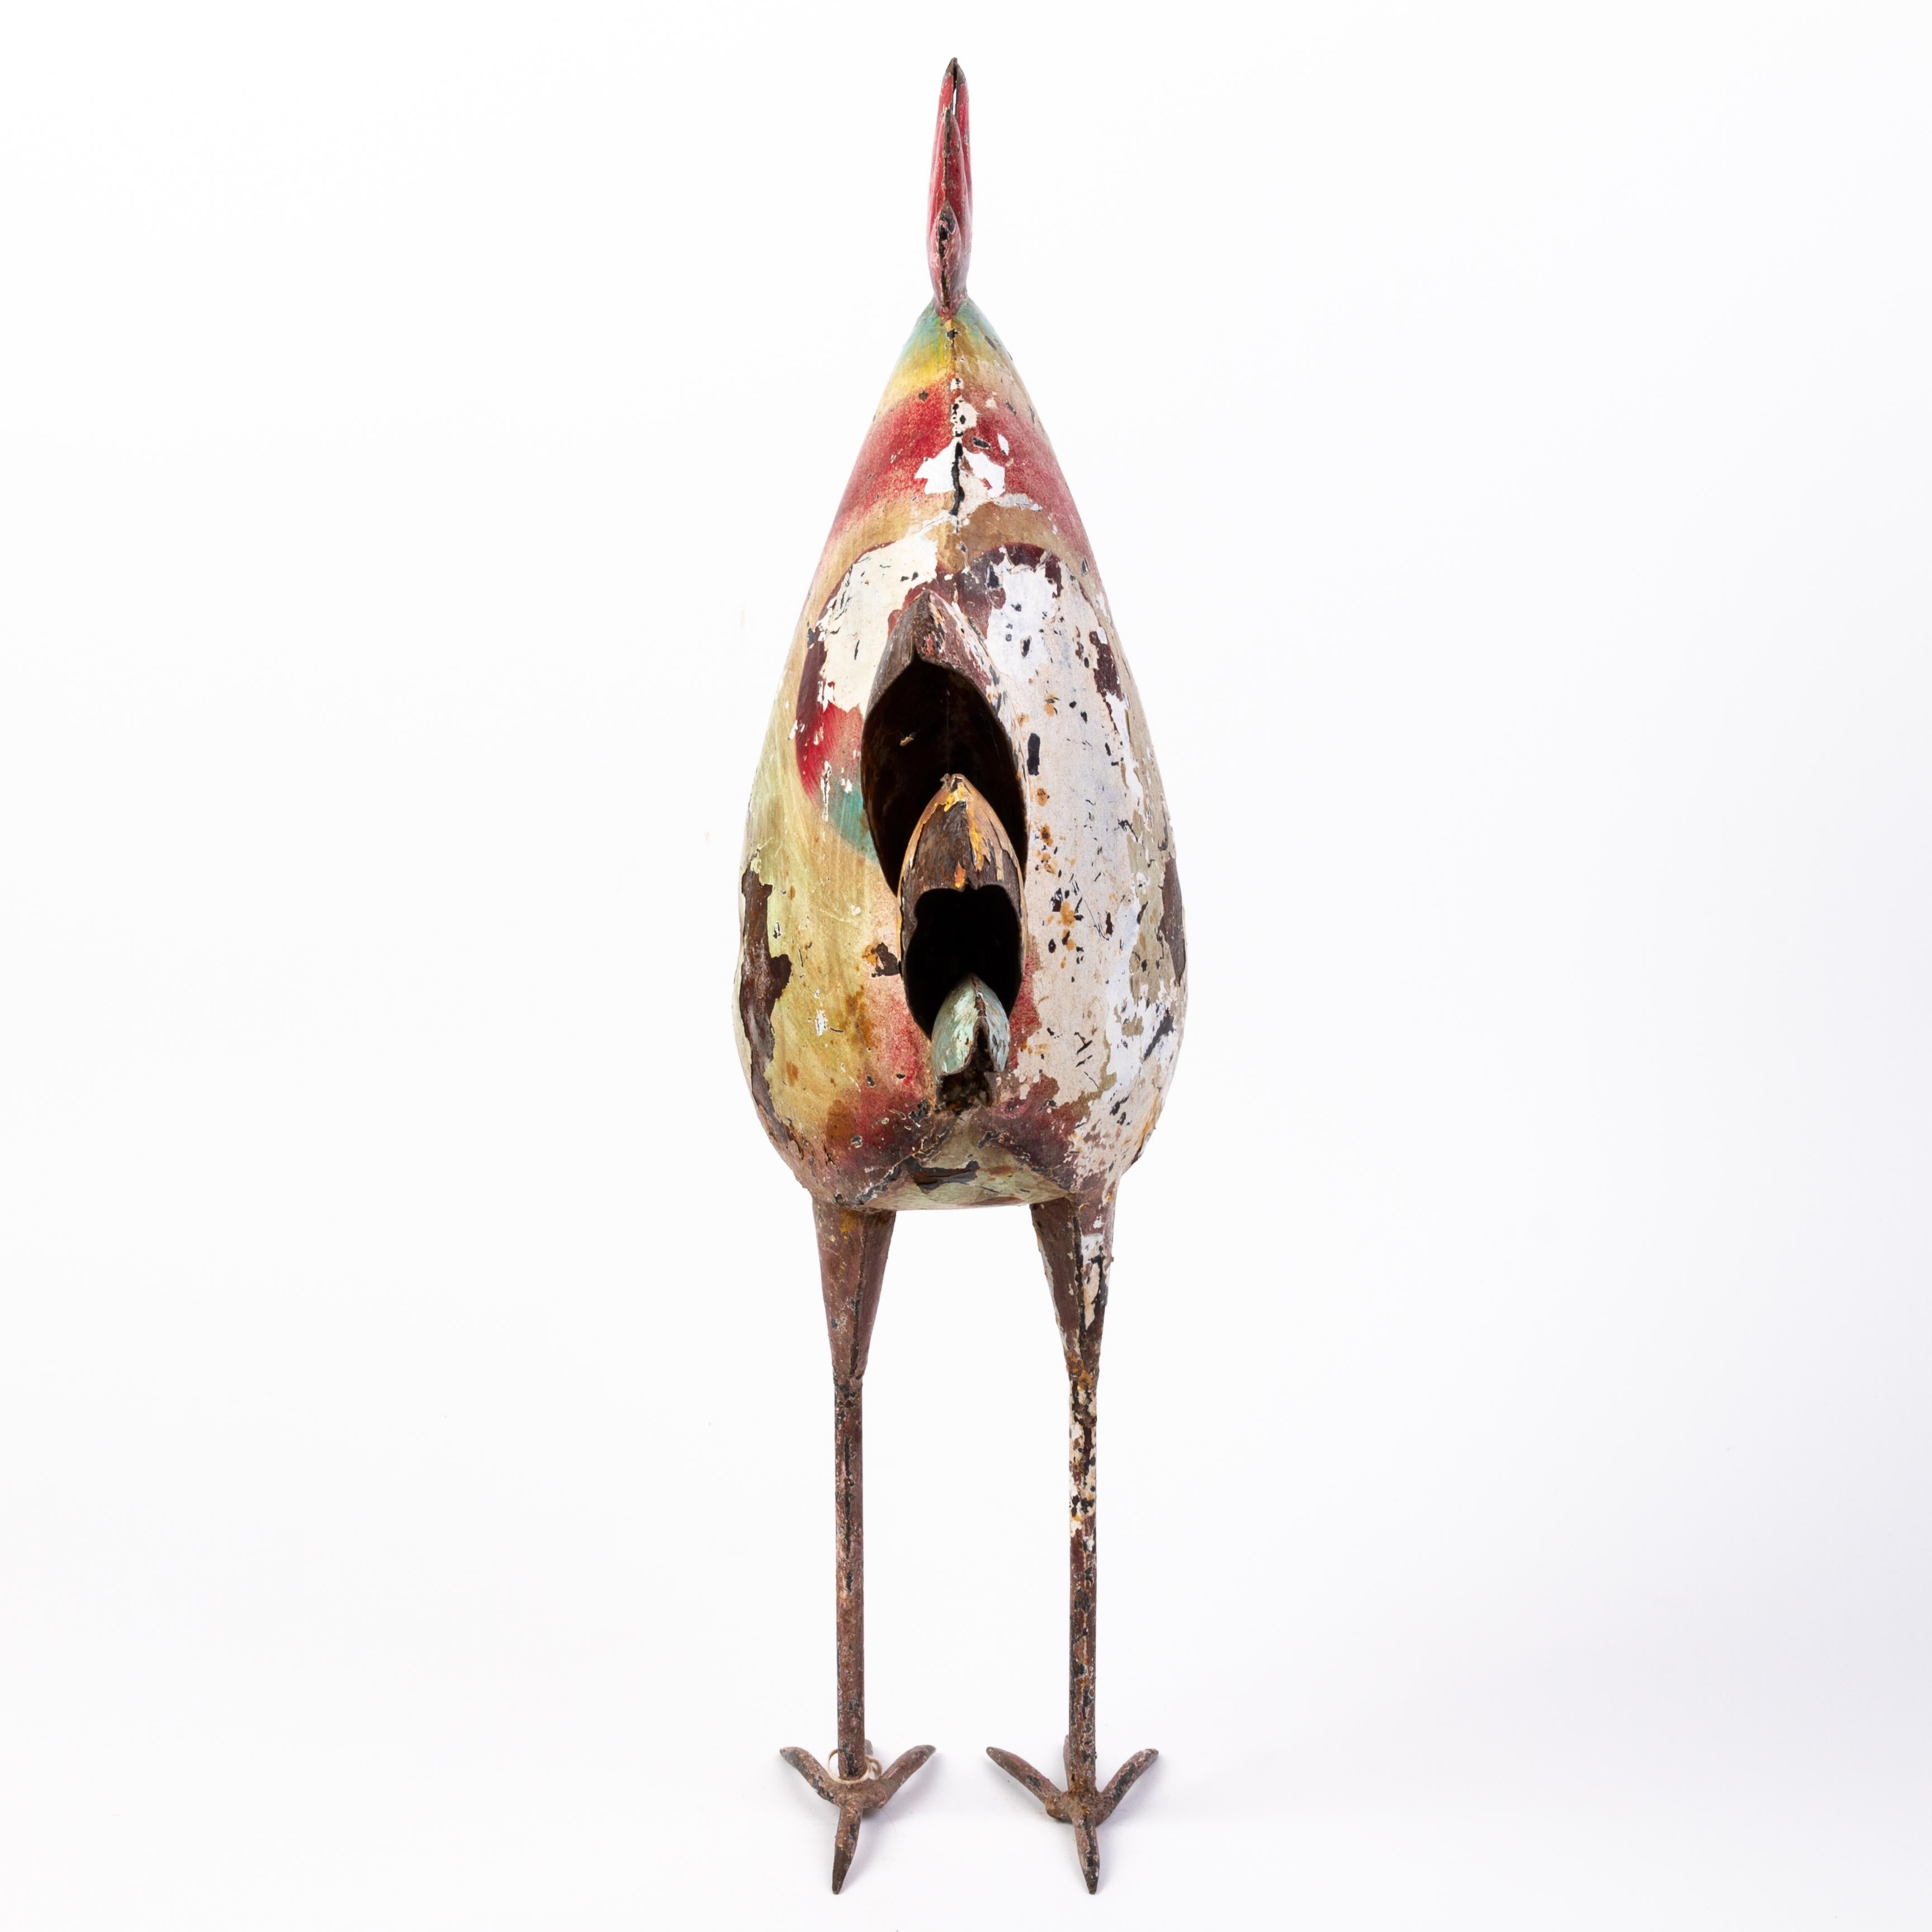 20th Century Painted Rooster Interior Design Toleware Sculpture  For Sale